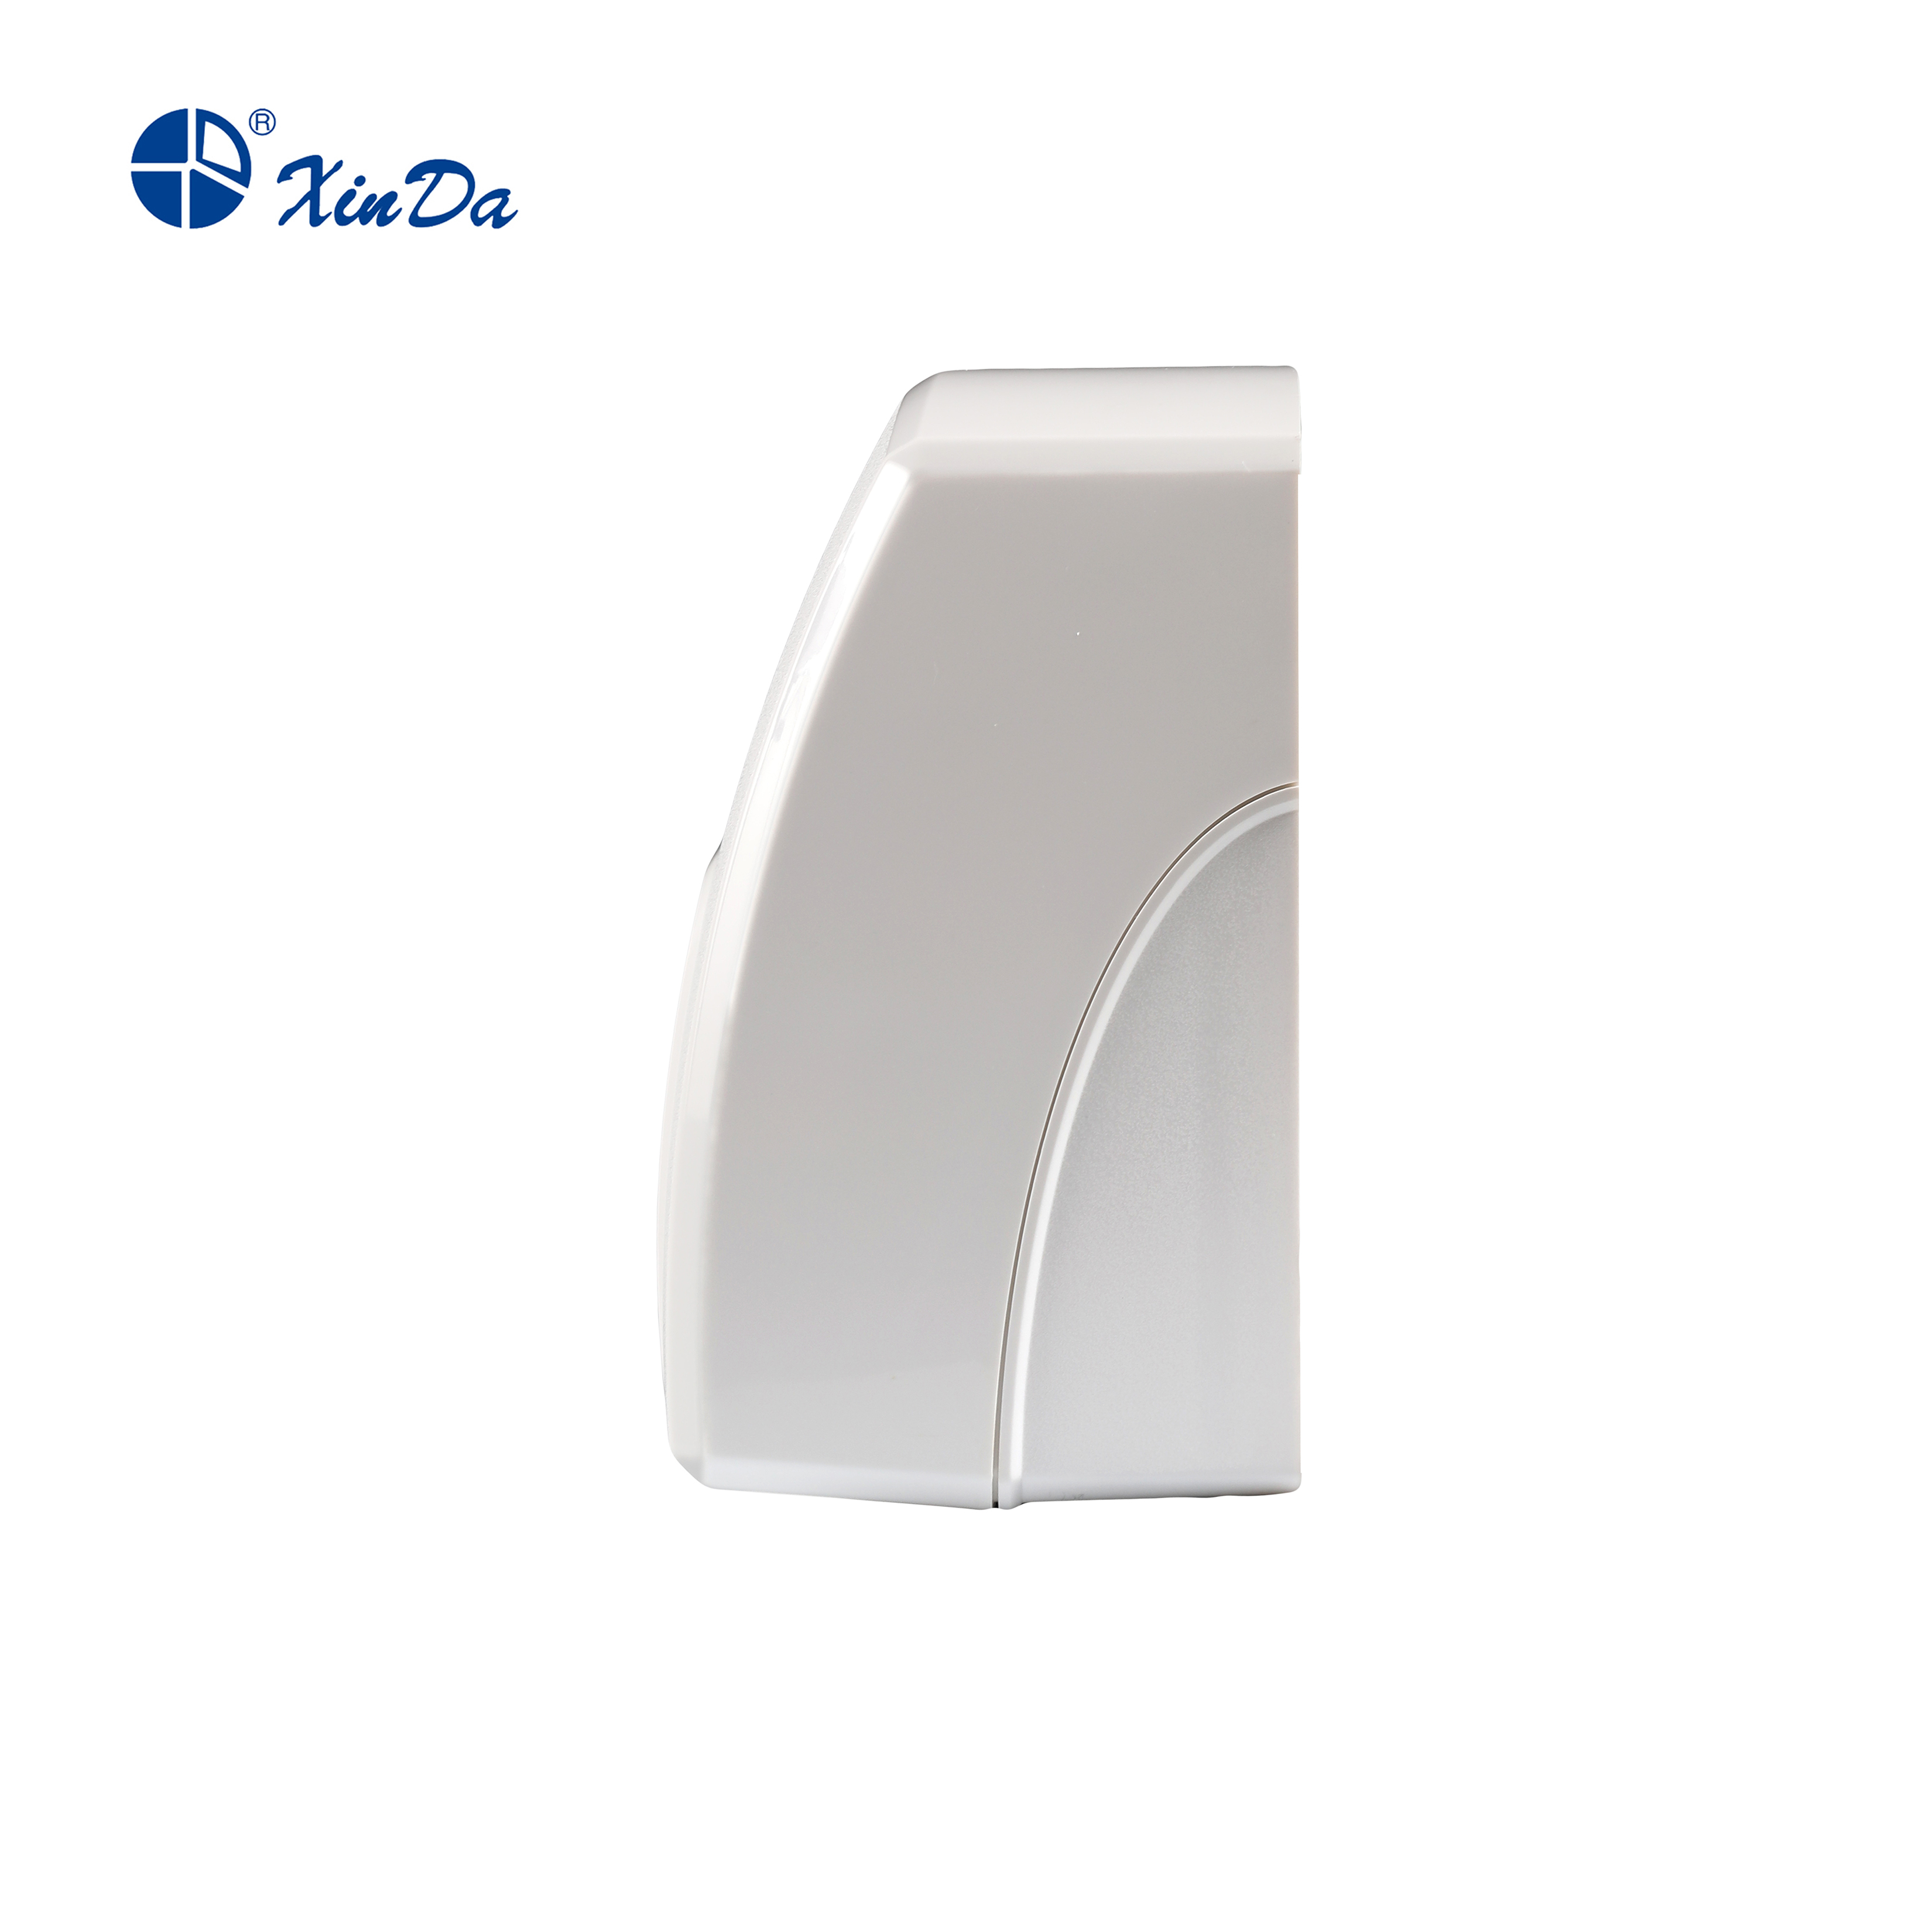 The XinDa GSQ150 factory sell Automatic stainless steel hand dryers low noise hand dryer Hand Dryer